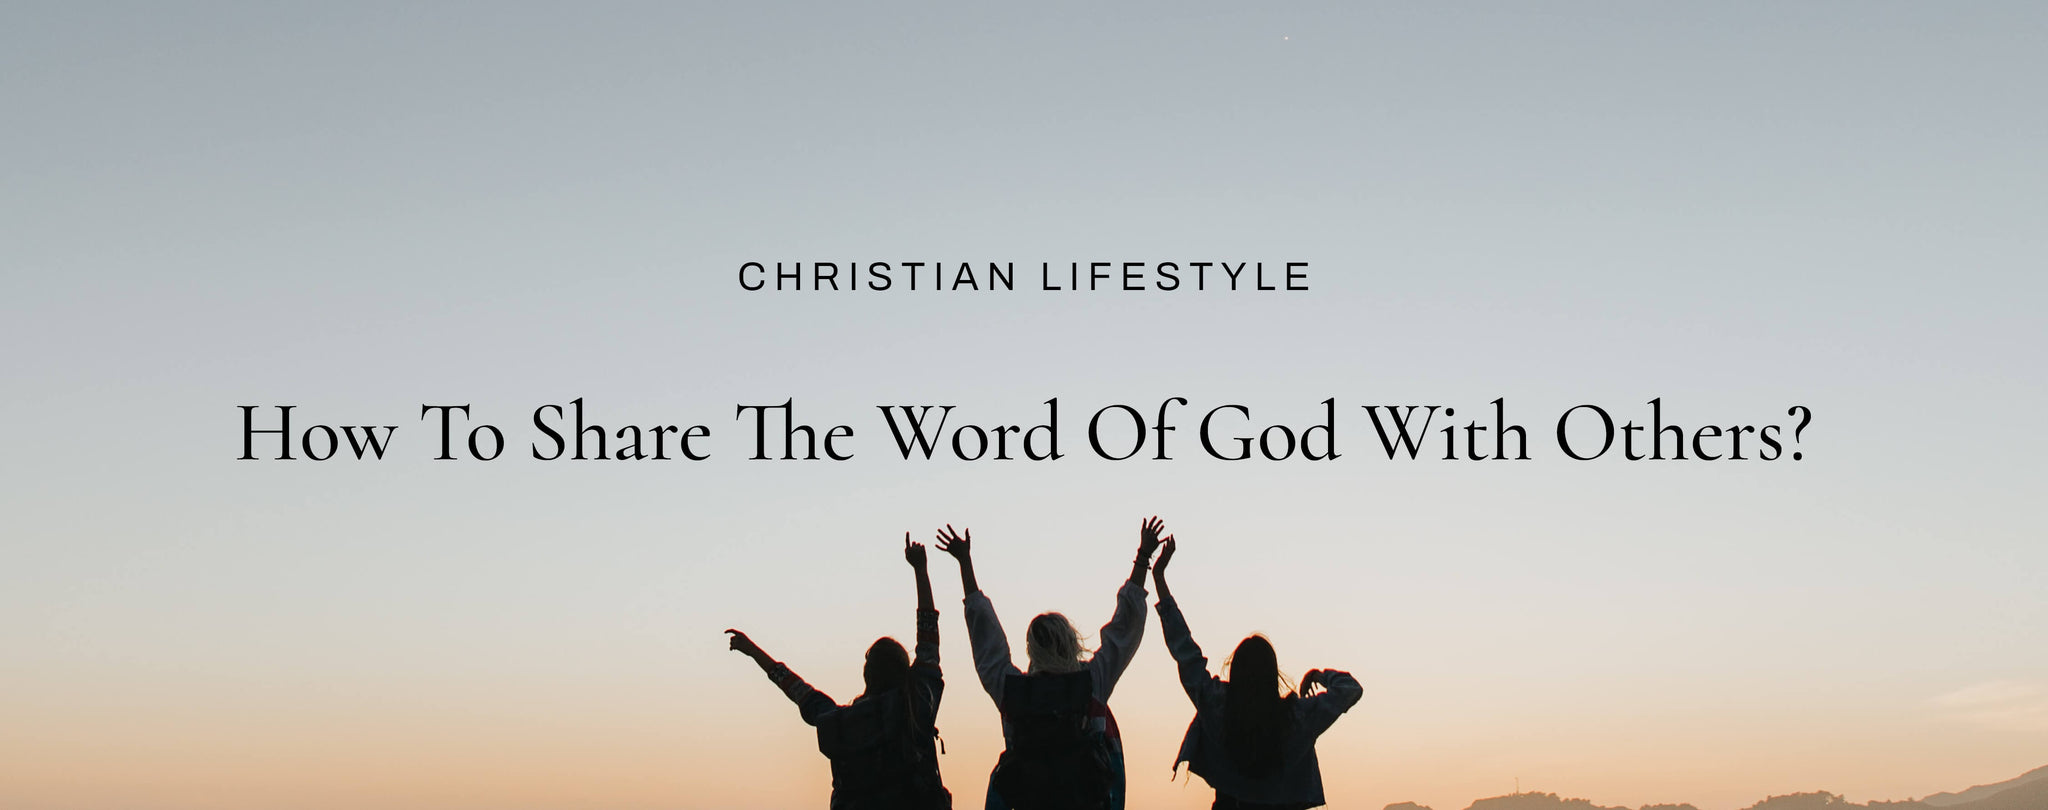 how to share the word of god with others